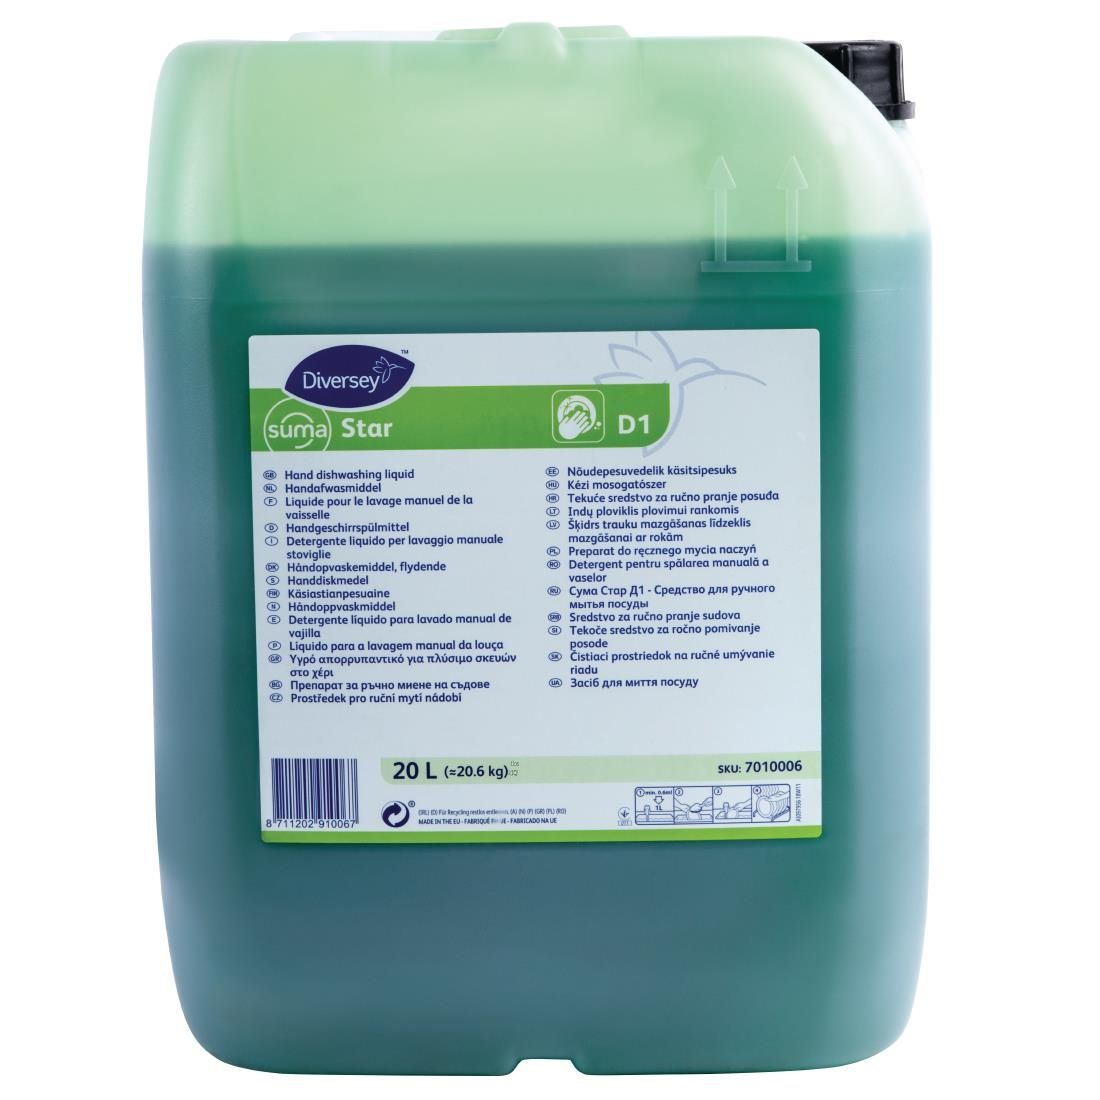 FA464 Suma Star D1 Washing Up Liquid Concentrate 20Ltr